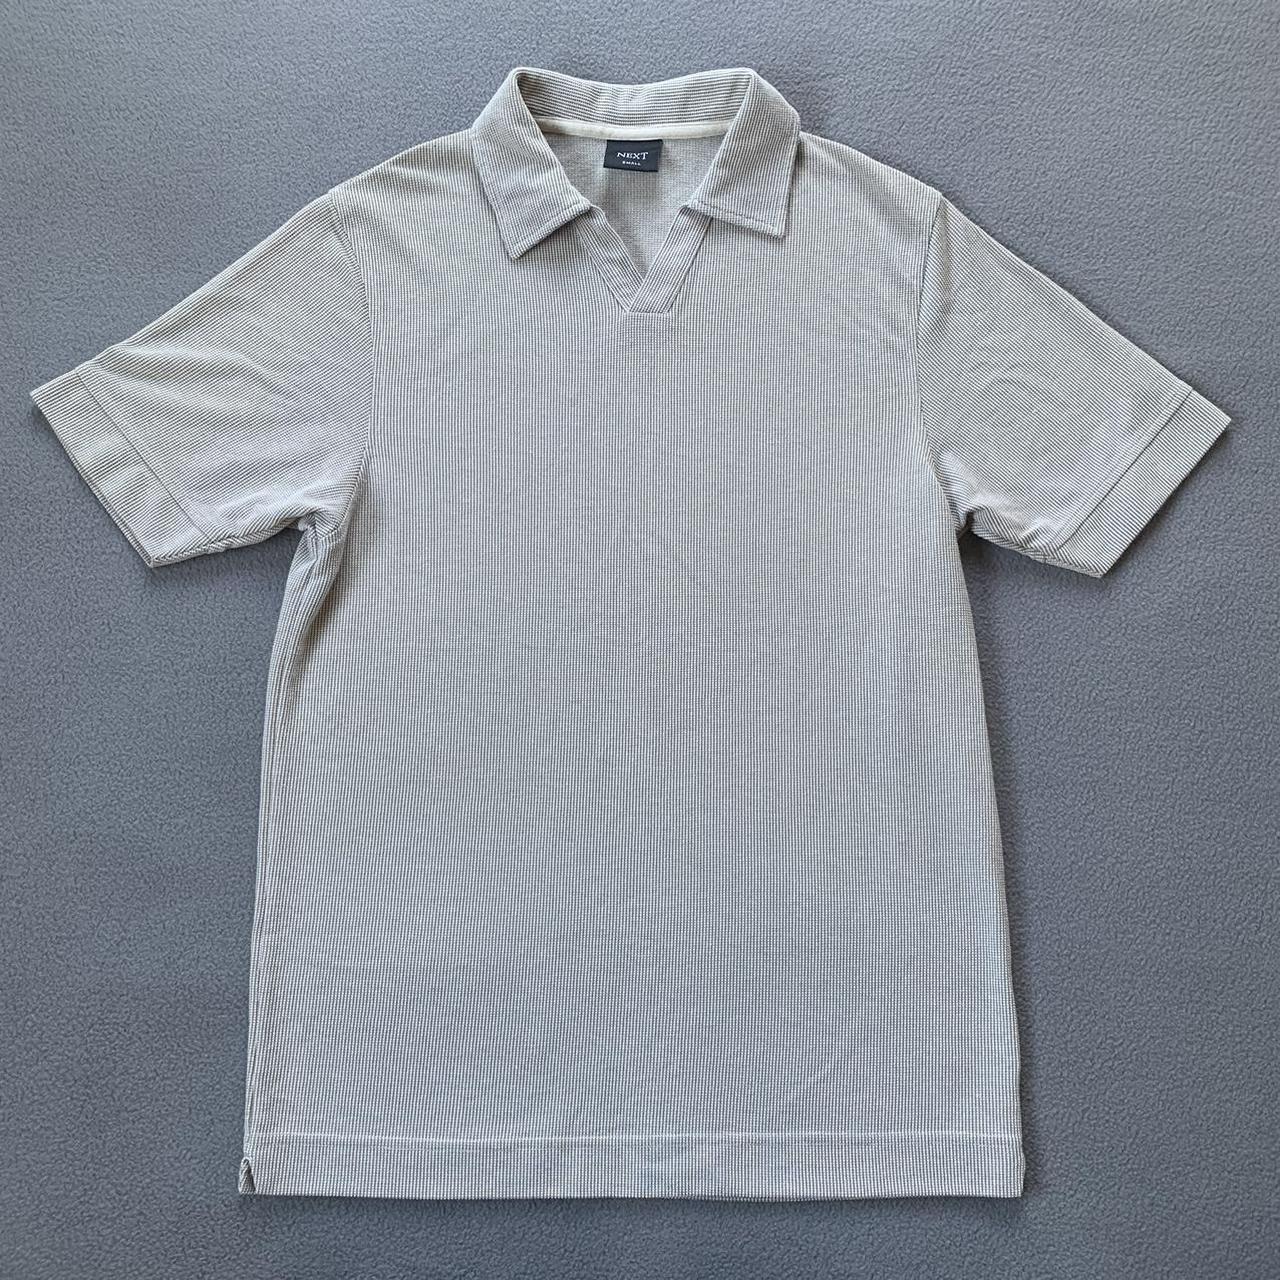 Vintage 2003 next polo shirt in a waffle style beige... - Depop